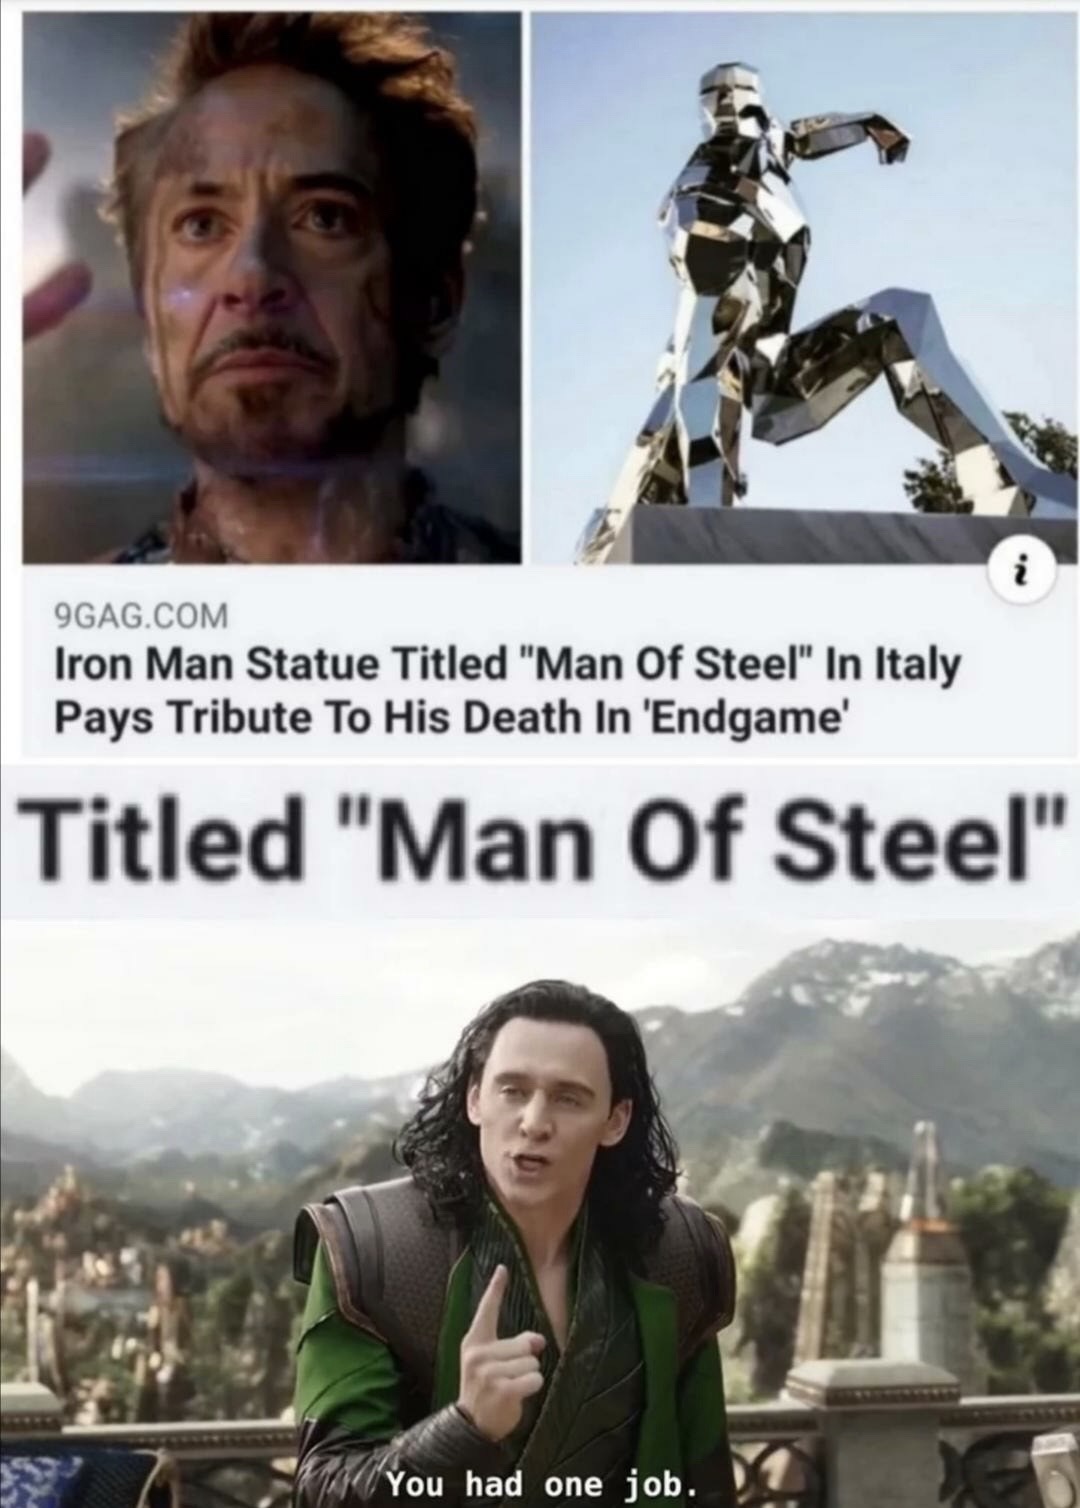 man of steel memes - 9GAG.Com Iron Man Statue Titled "Man Of Steel" In Italy Pays Tribute To His Death In 'Endgame' Titled "Man Of Steel" You had one job.